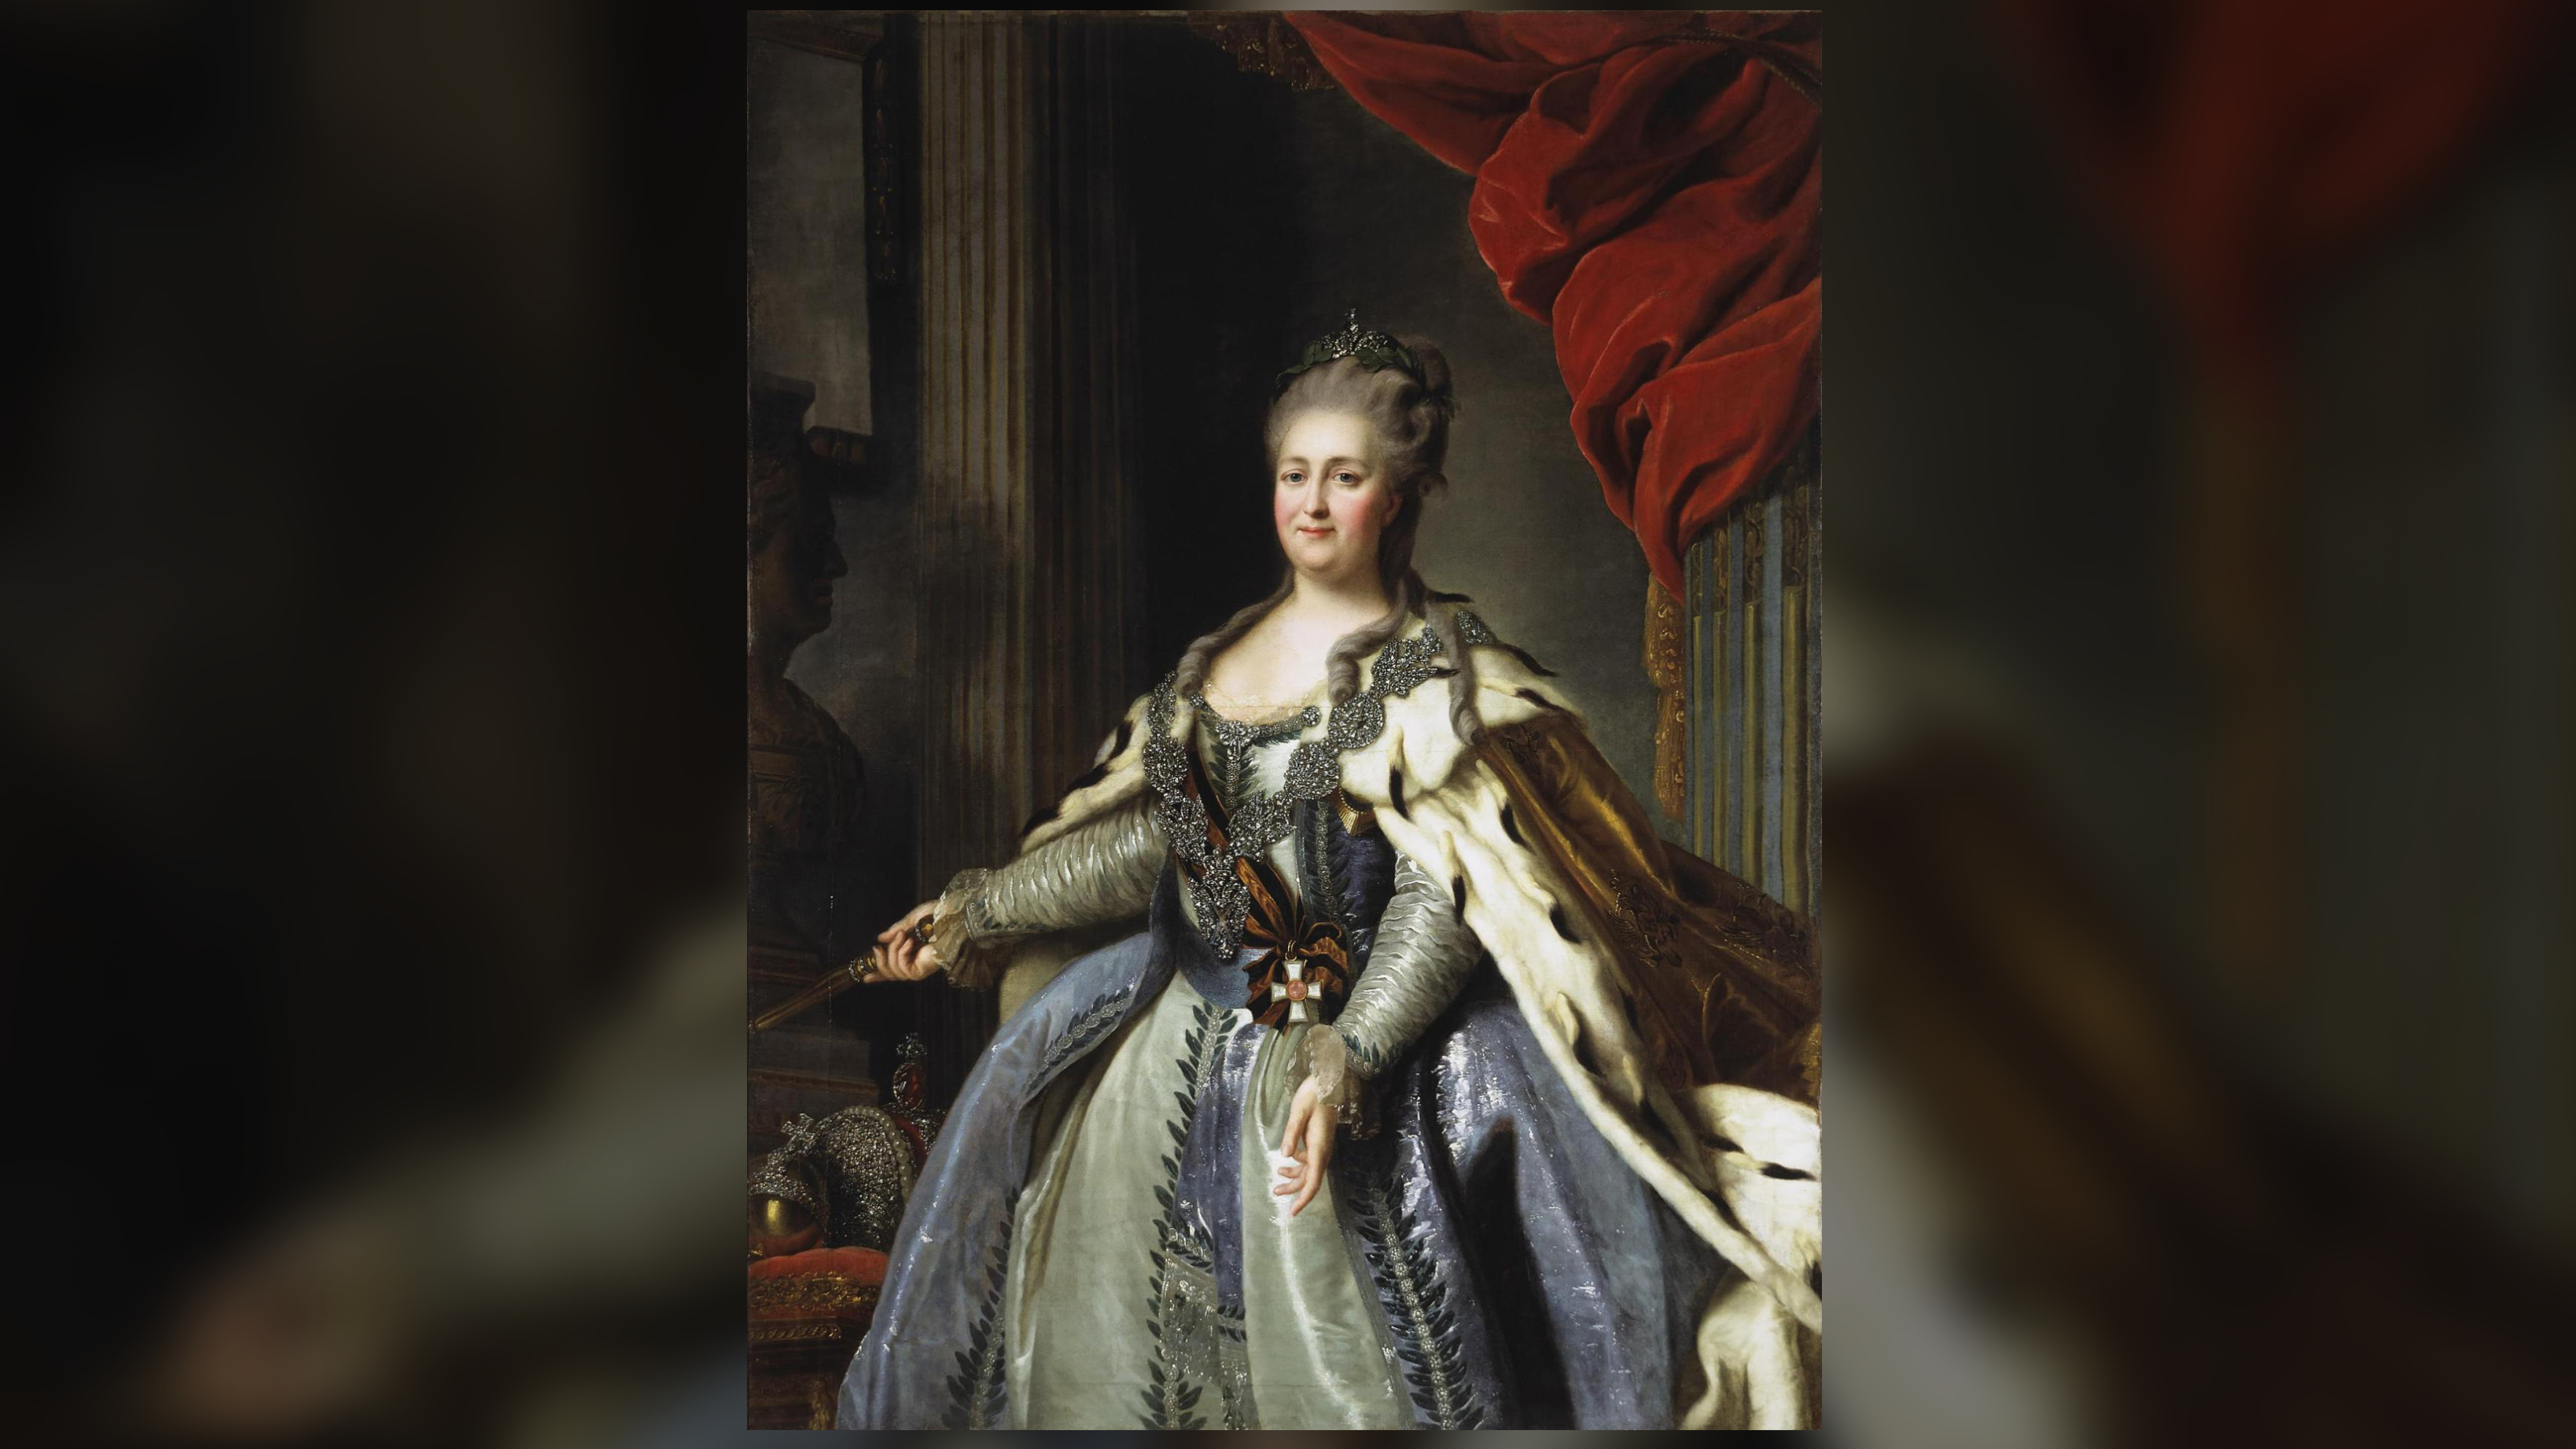 A portrait of Catherine the Great by Feodor Stepanovich Rokotov